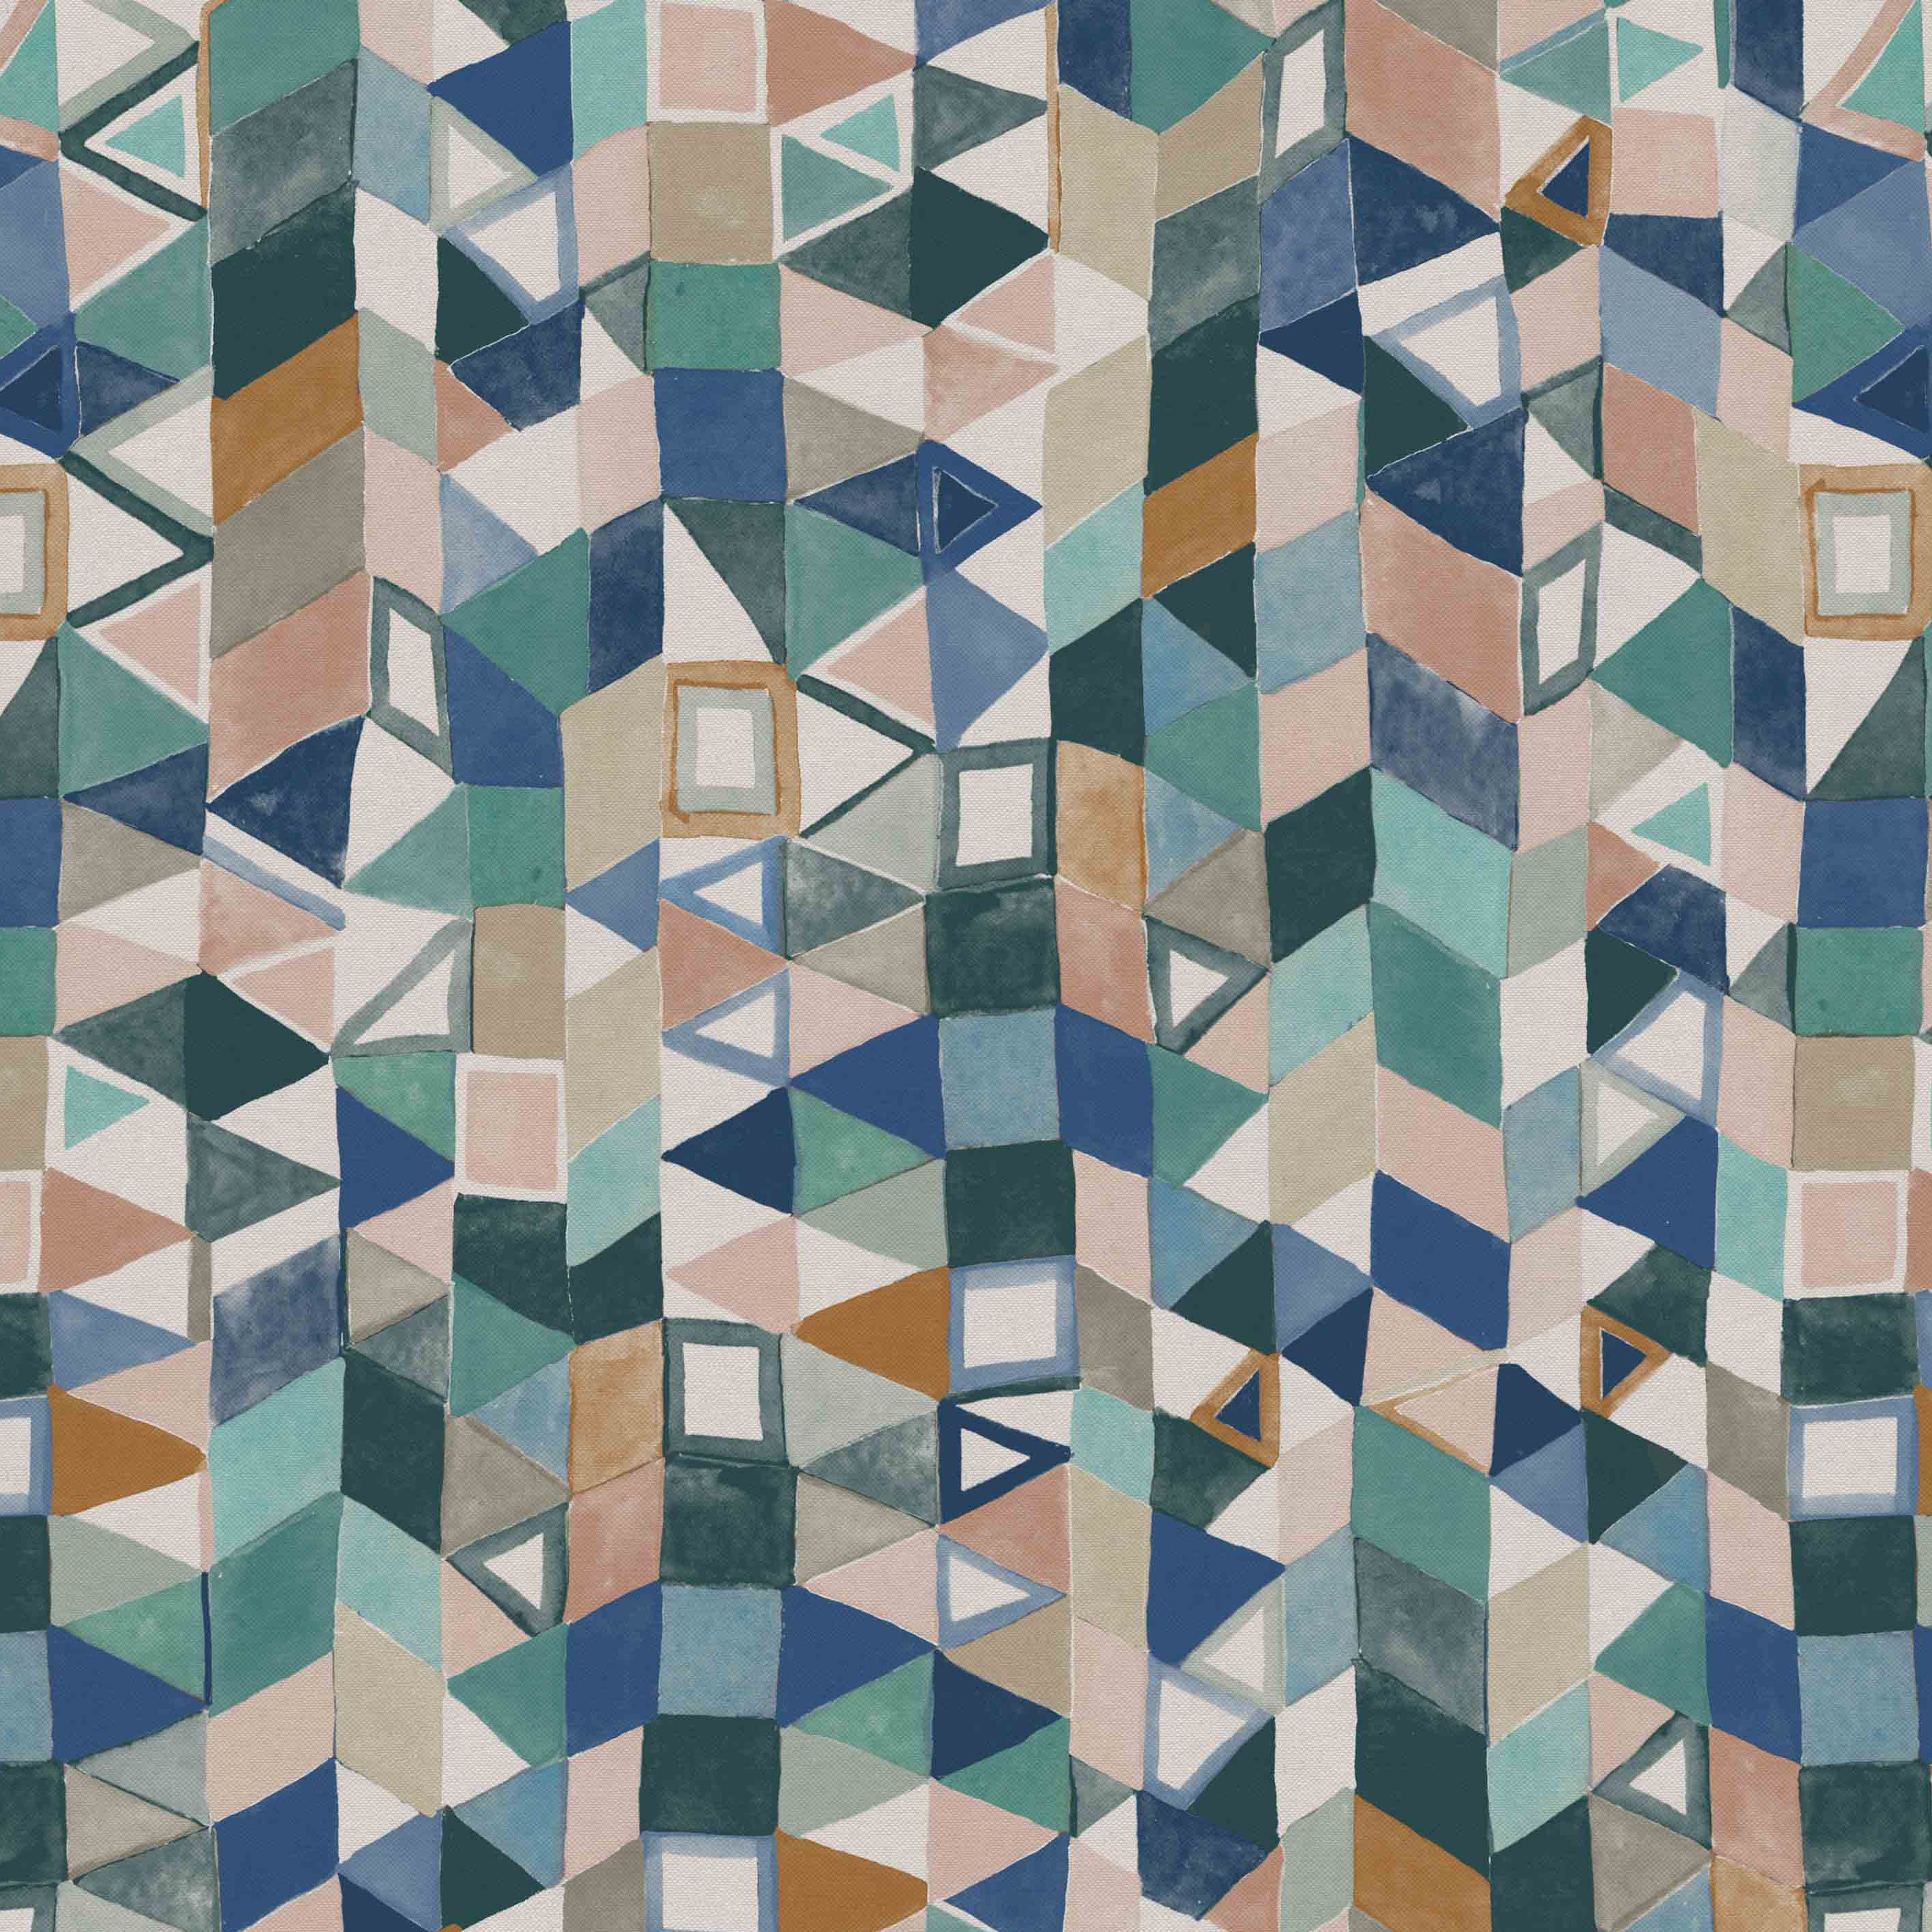 Detail of fabric in a small-scale playful geometric print in shades of blue, green, gray and tan.